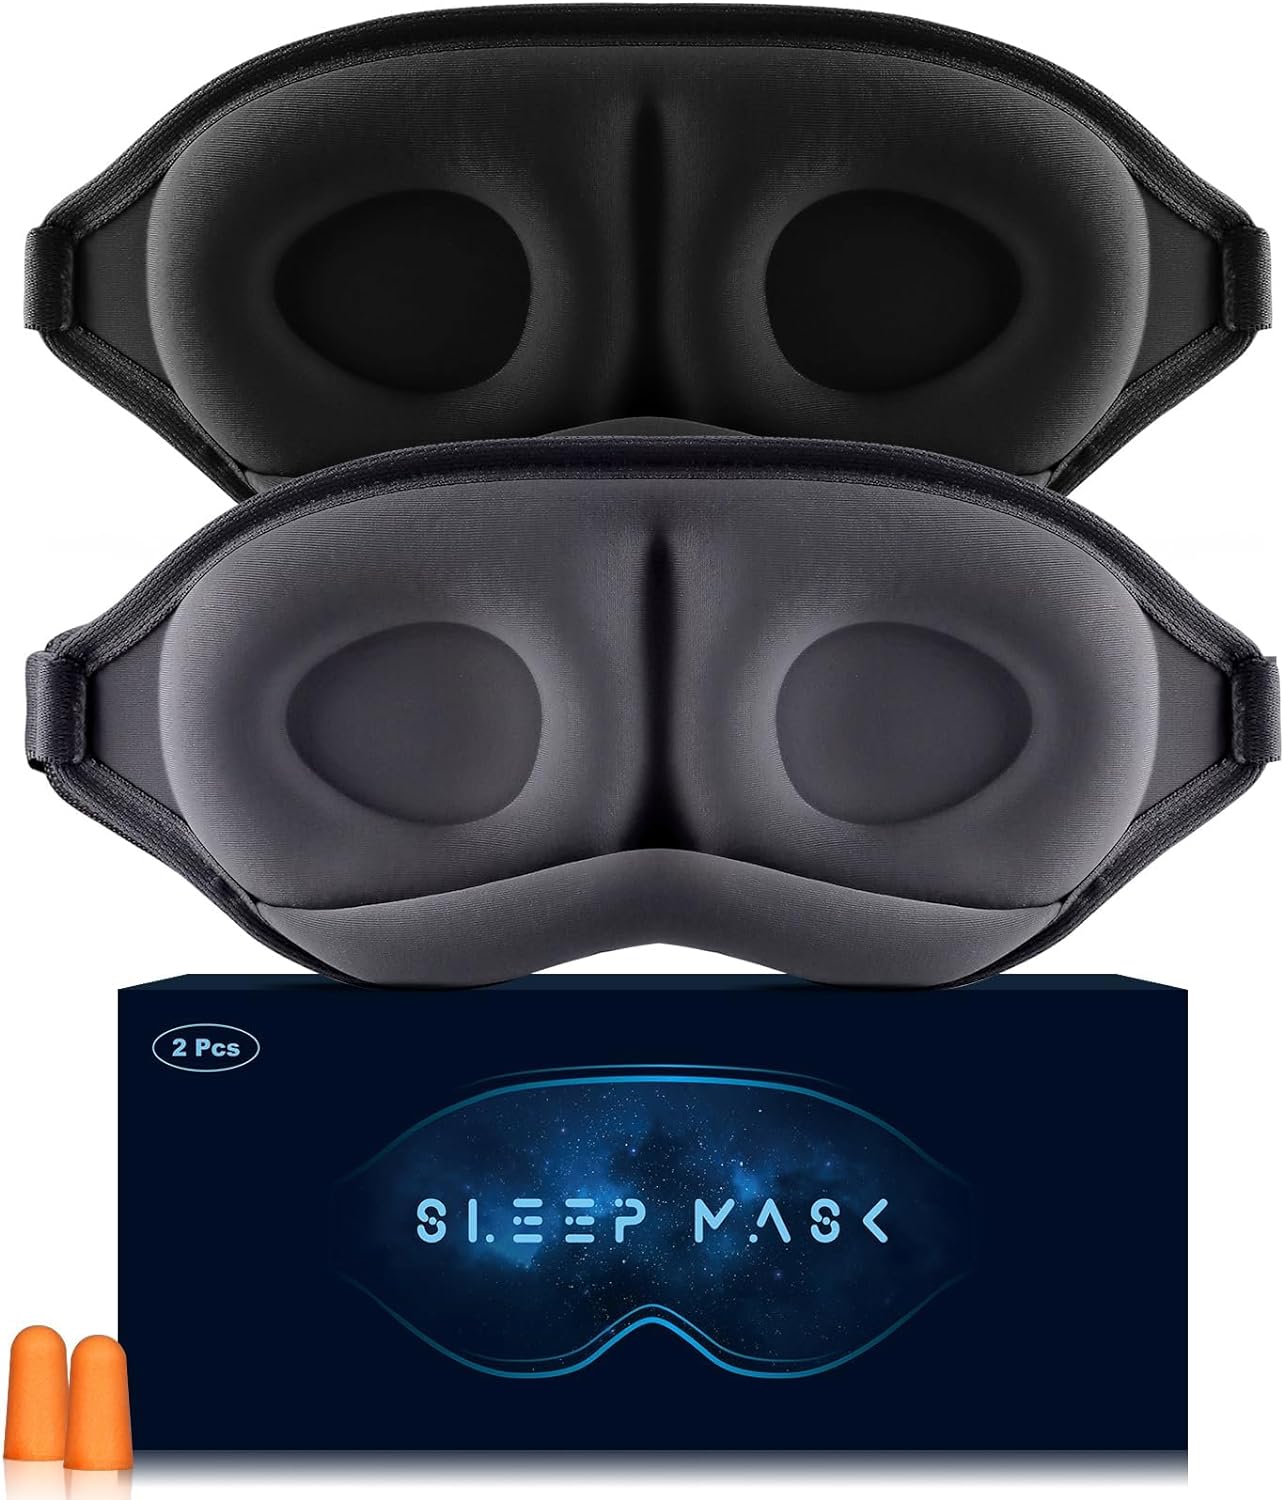 Ive been wearing masks for years and thought I had decent ones. But then I saw these and purchased. Truly amazing fit, quality, price and total blackout effect. Most comfortable masks. And the business owner shipped immediately and included a lovely letter. Support this business and get two amazing quality and designed masks!